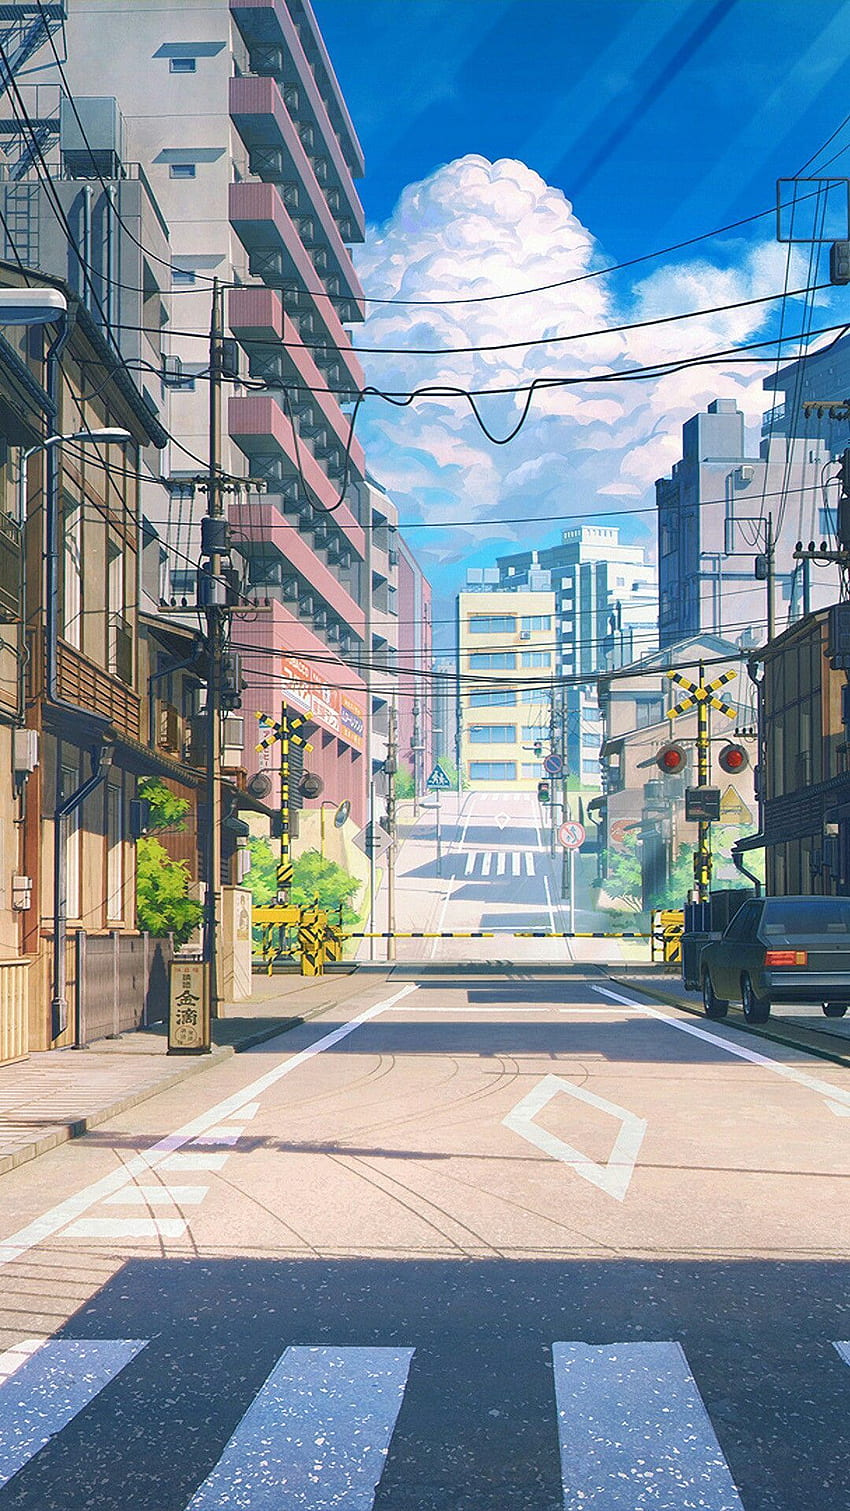 anime city street scene with a stairway leading to a restaurant, anime  background art, anime style cityscape, colorful anime movie background,  beautiful anime scenery - SeaArt AI